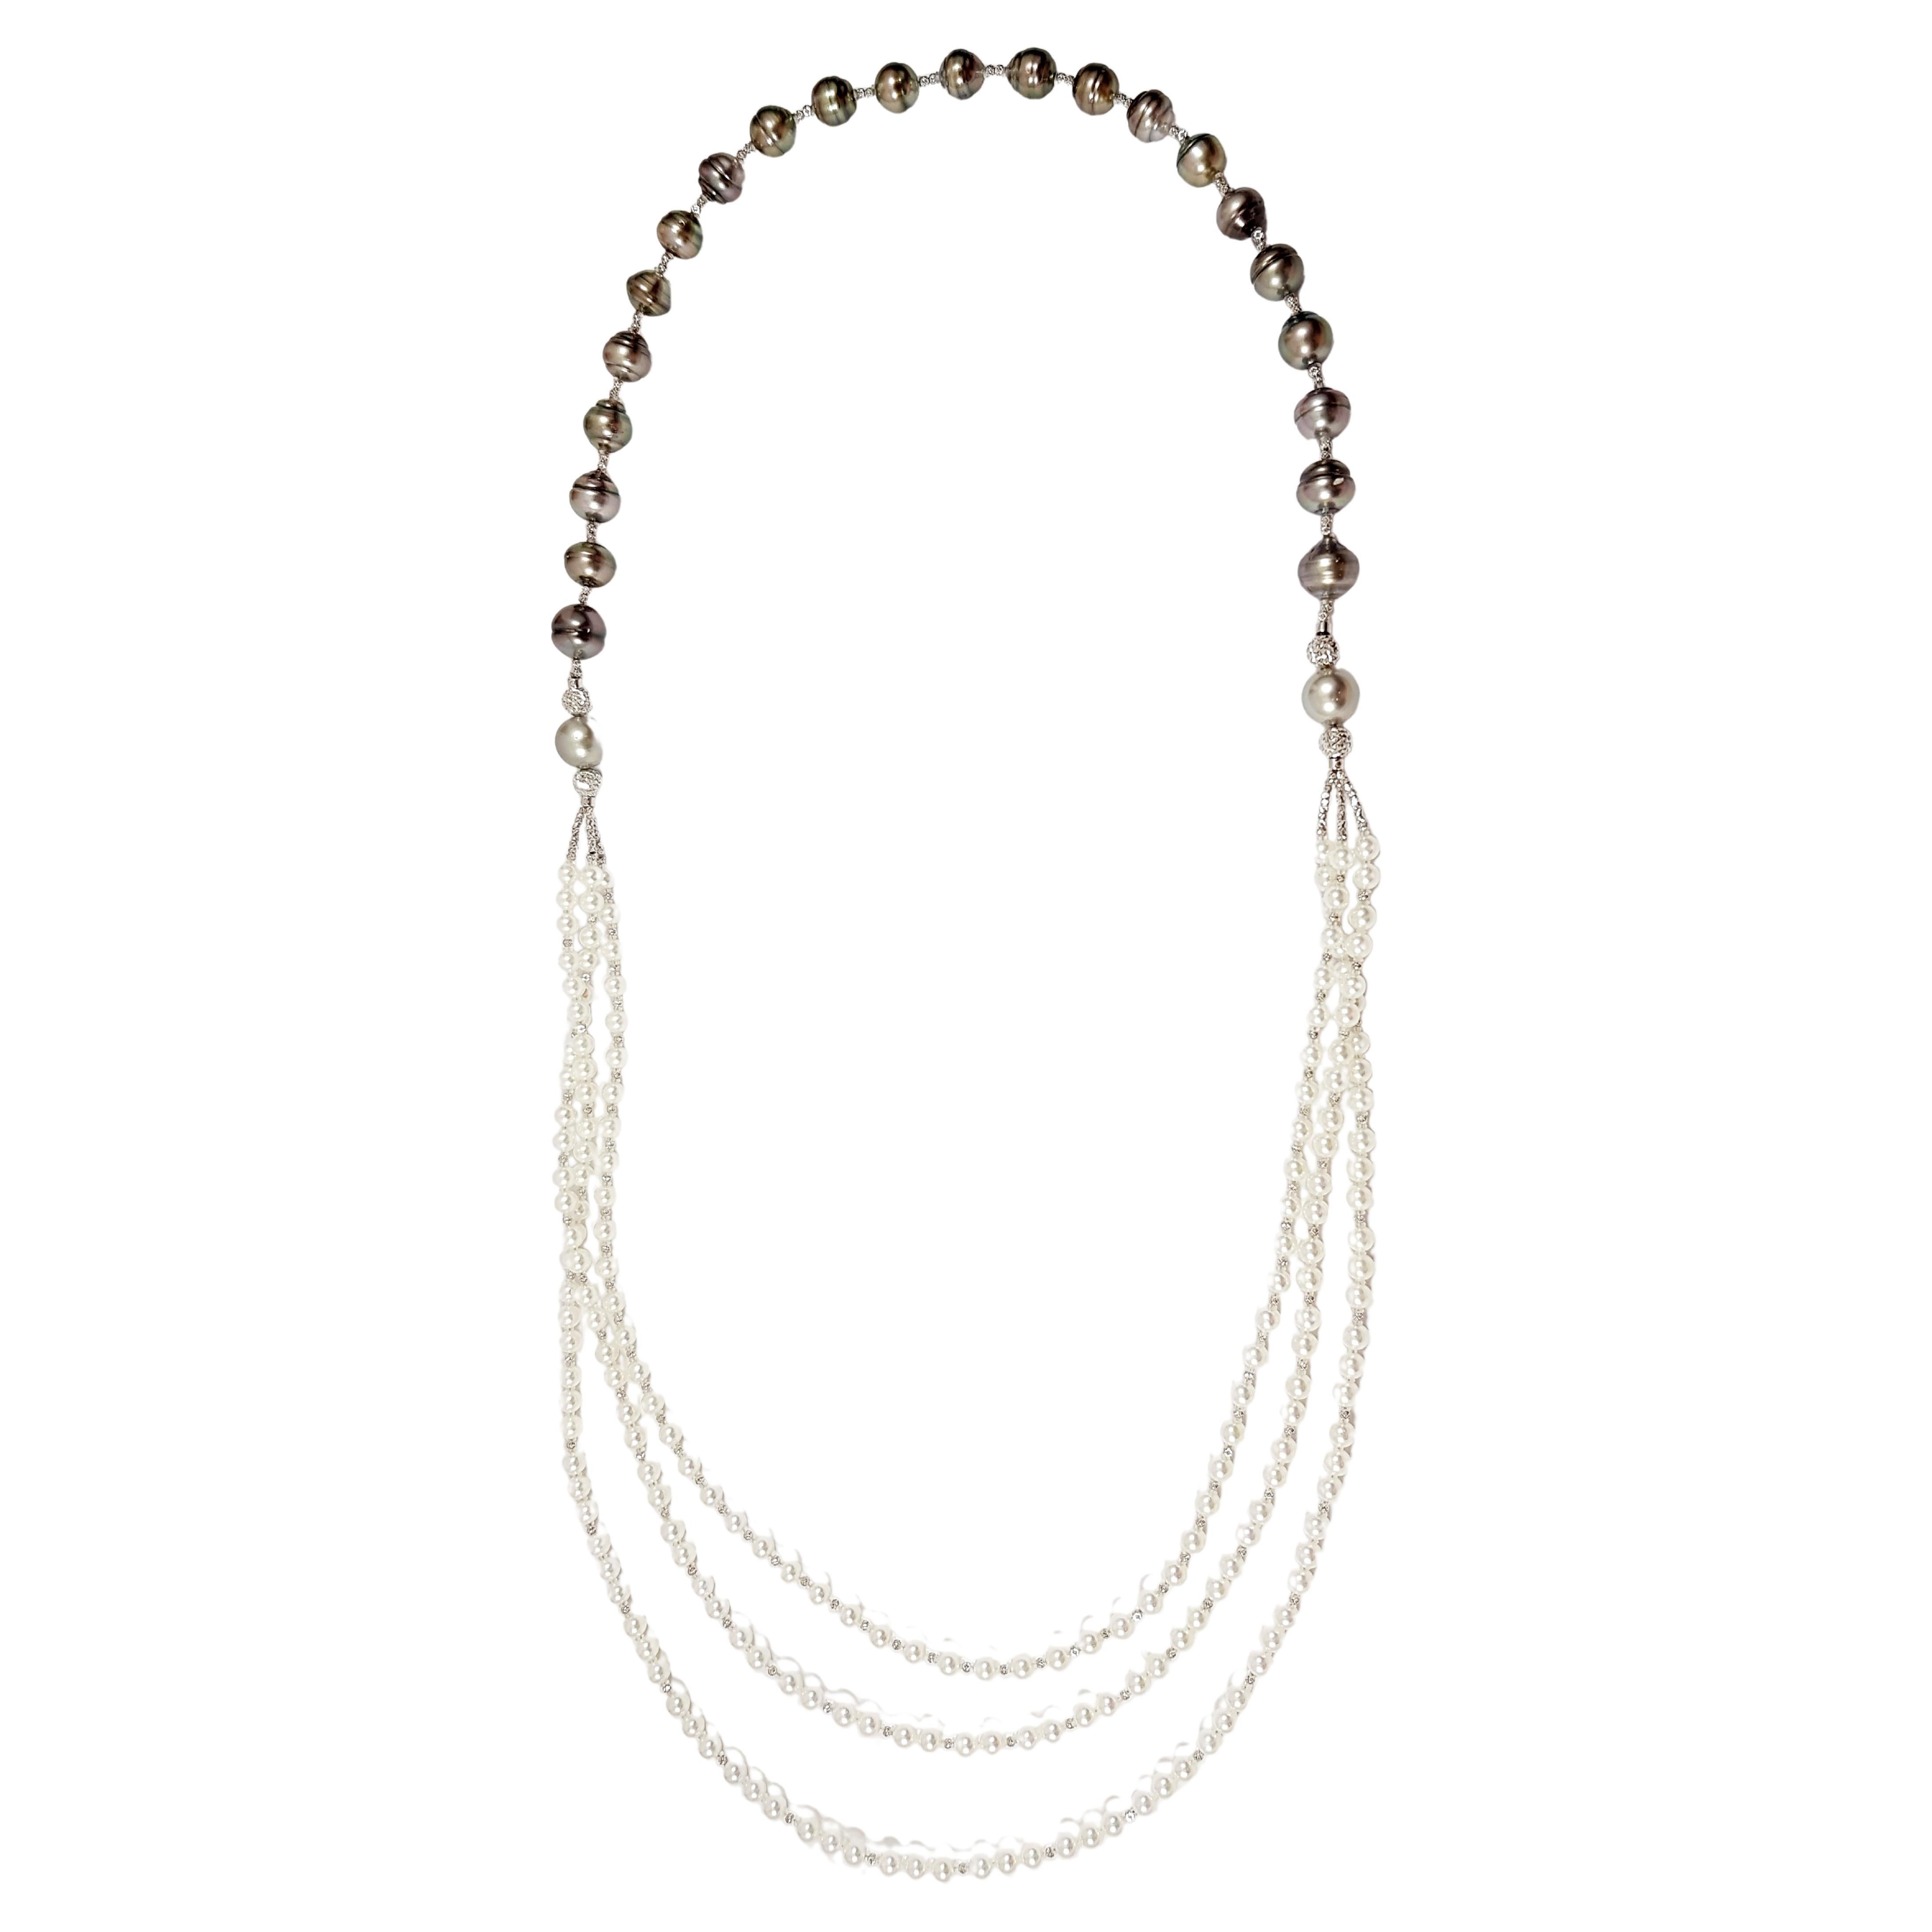 South Sea Pearl with Akoya Pearl Necklace Set in 18 Karat White Gold Settings